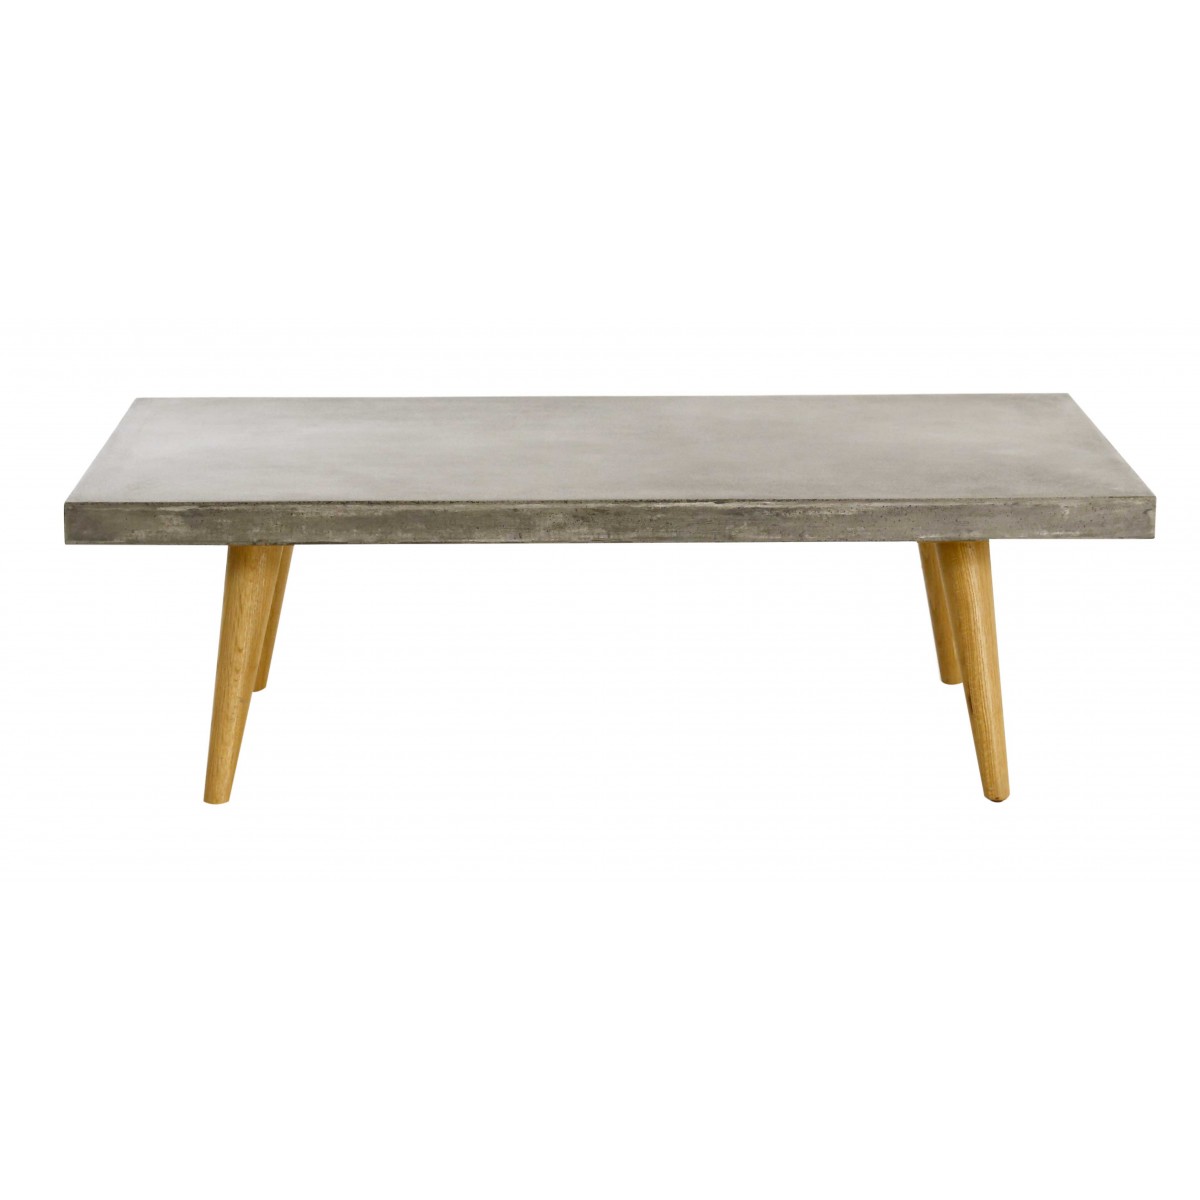 Table basse rectangulaire scandinave